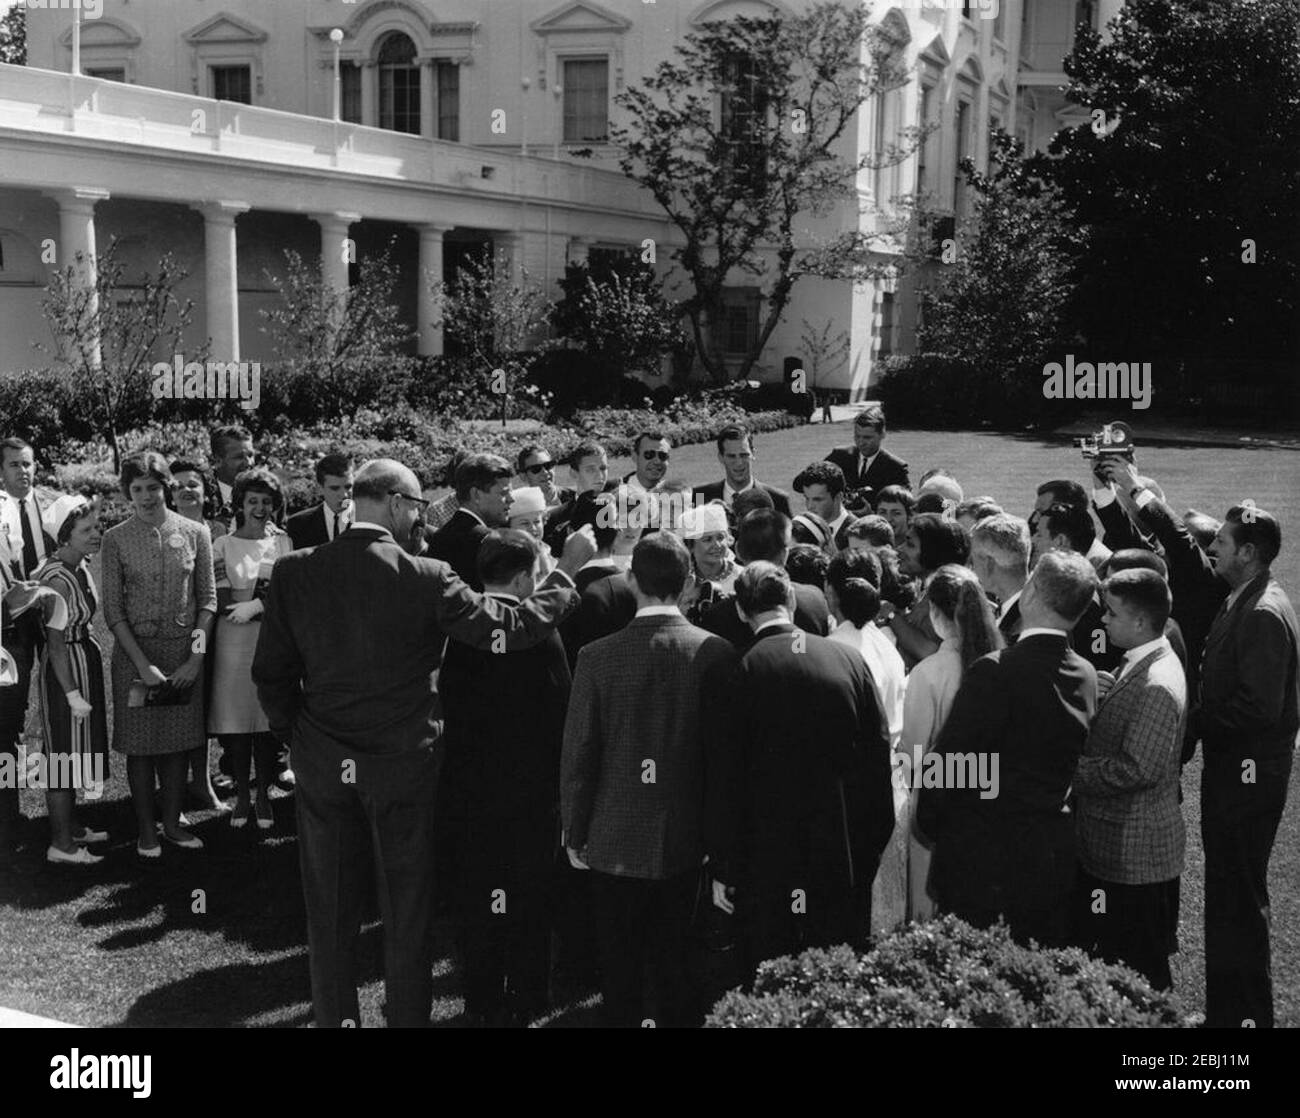 Visit of a delegation from the Foundation for the Junior Blind, 10:04AM. President John F. Kennedy (center left) visits with delegates from the Foundation for the Junior Blind, of Los Angeles, California. Representative James Roosevelt of California (with arm outstretched) stands behind President Kennedy. Rose Garden, White House, Washington, D.C. Stock Photo